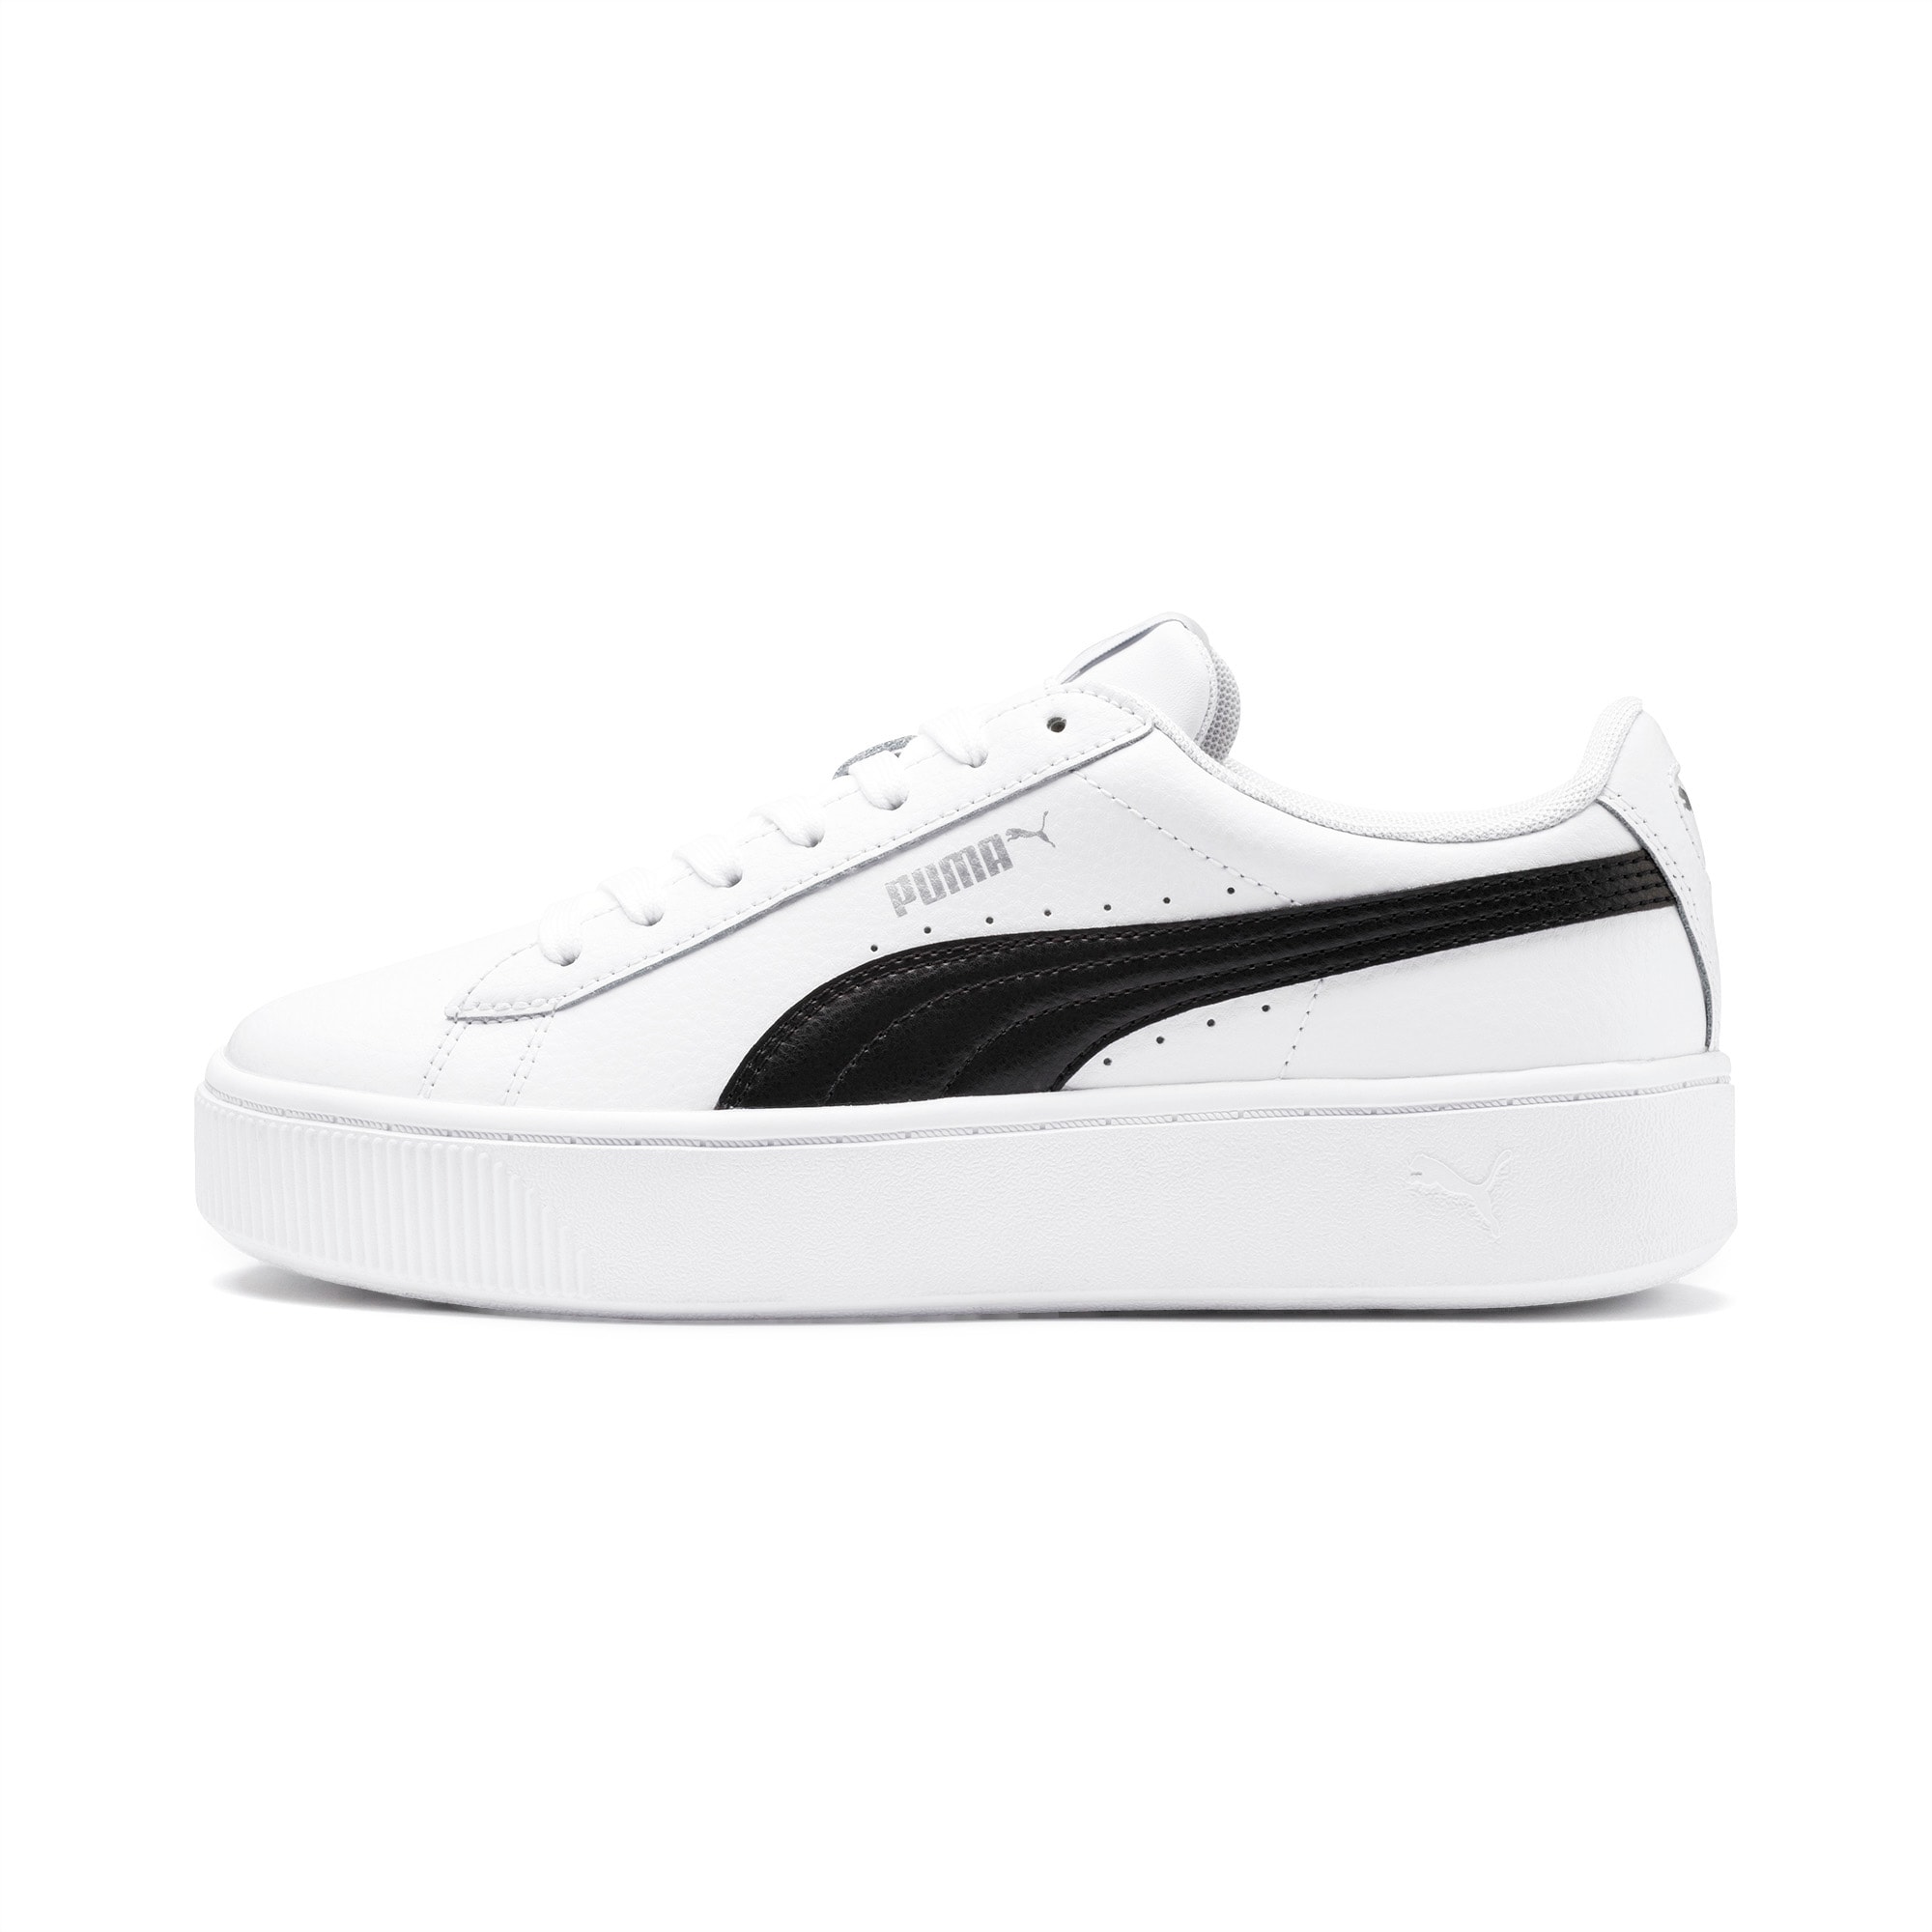 PUMA Vikky Stacked Women's Sneakers 